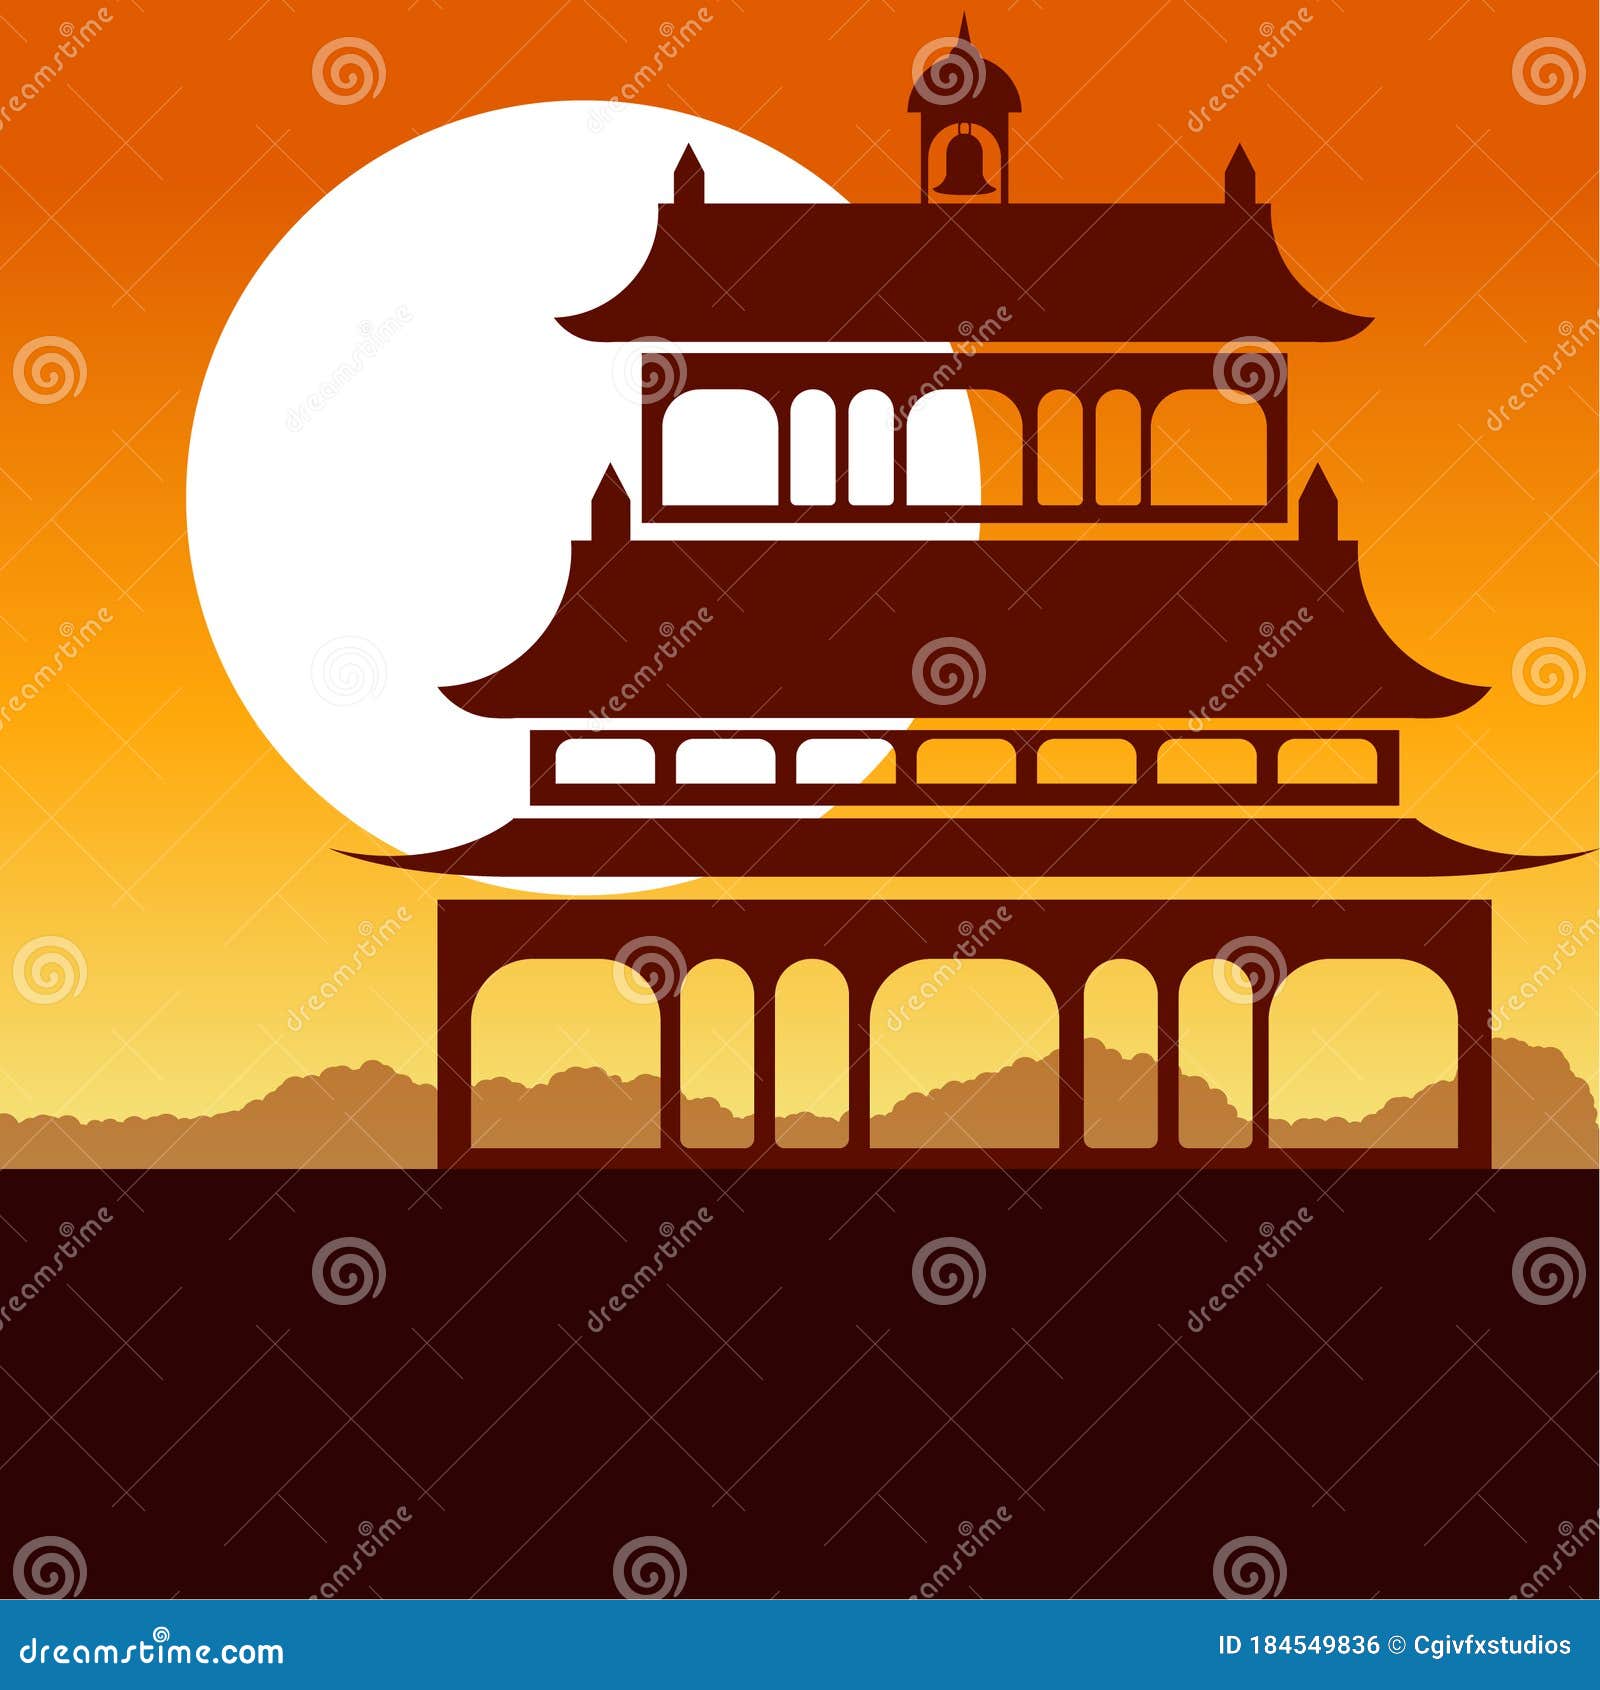 China Temple Silhouette with Sunset in Background Vector Illustration,  Editable Artwork Stock Vector - Illustration of drawing, icon: 184549836